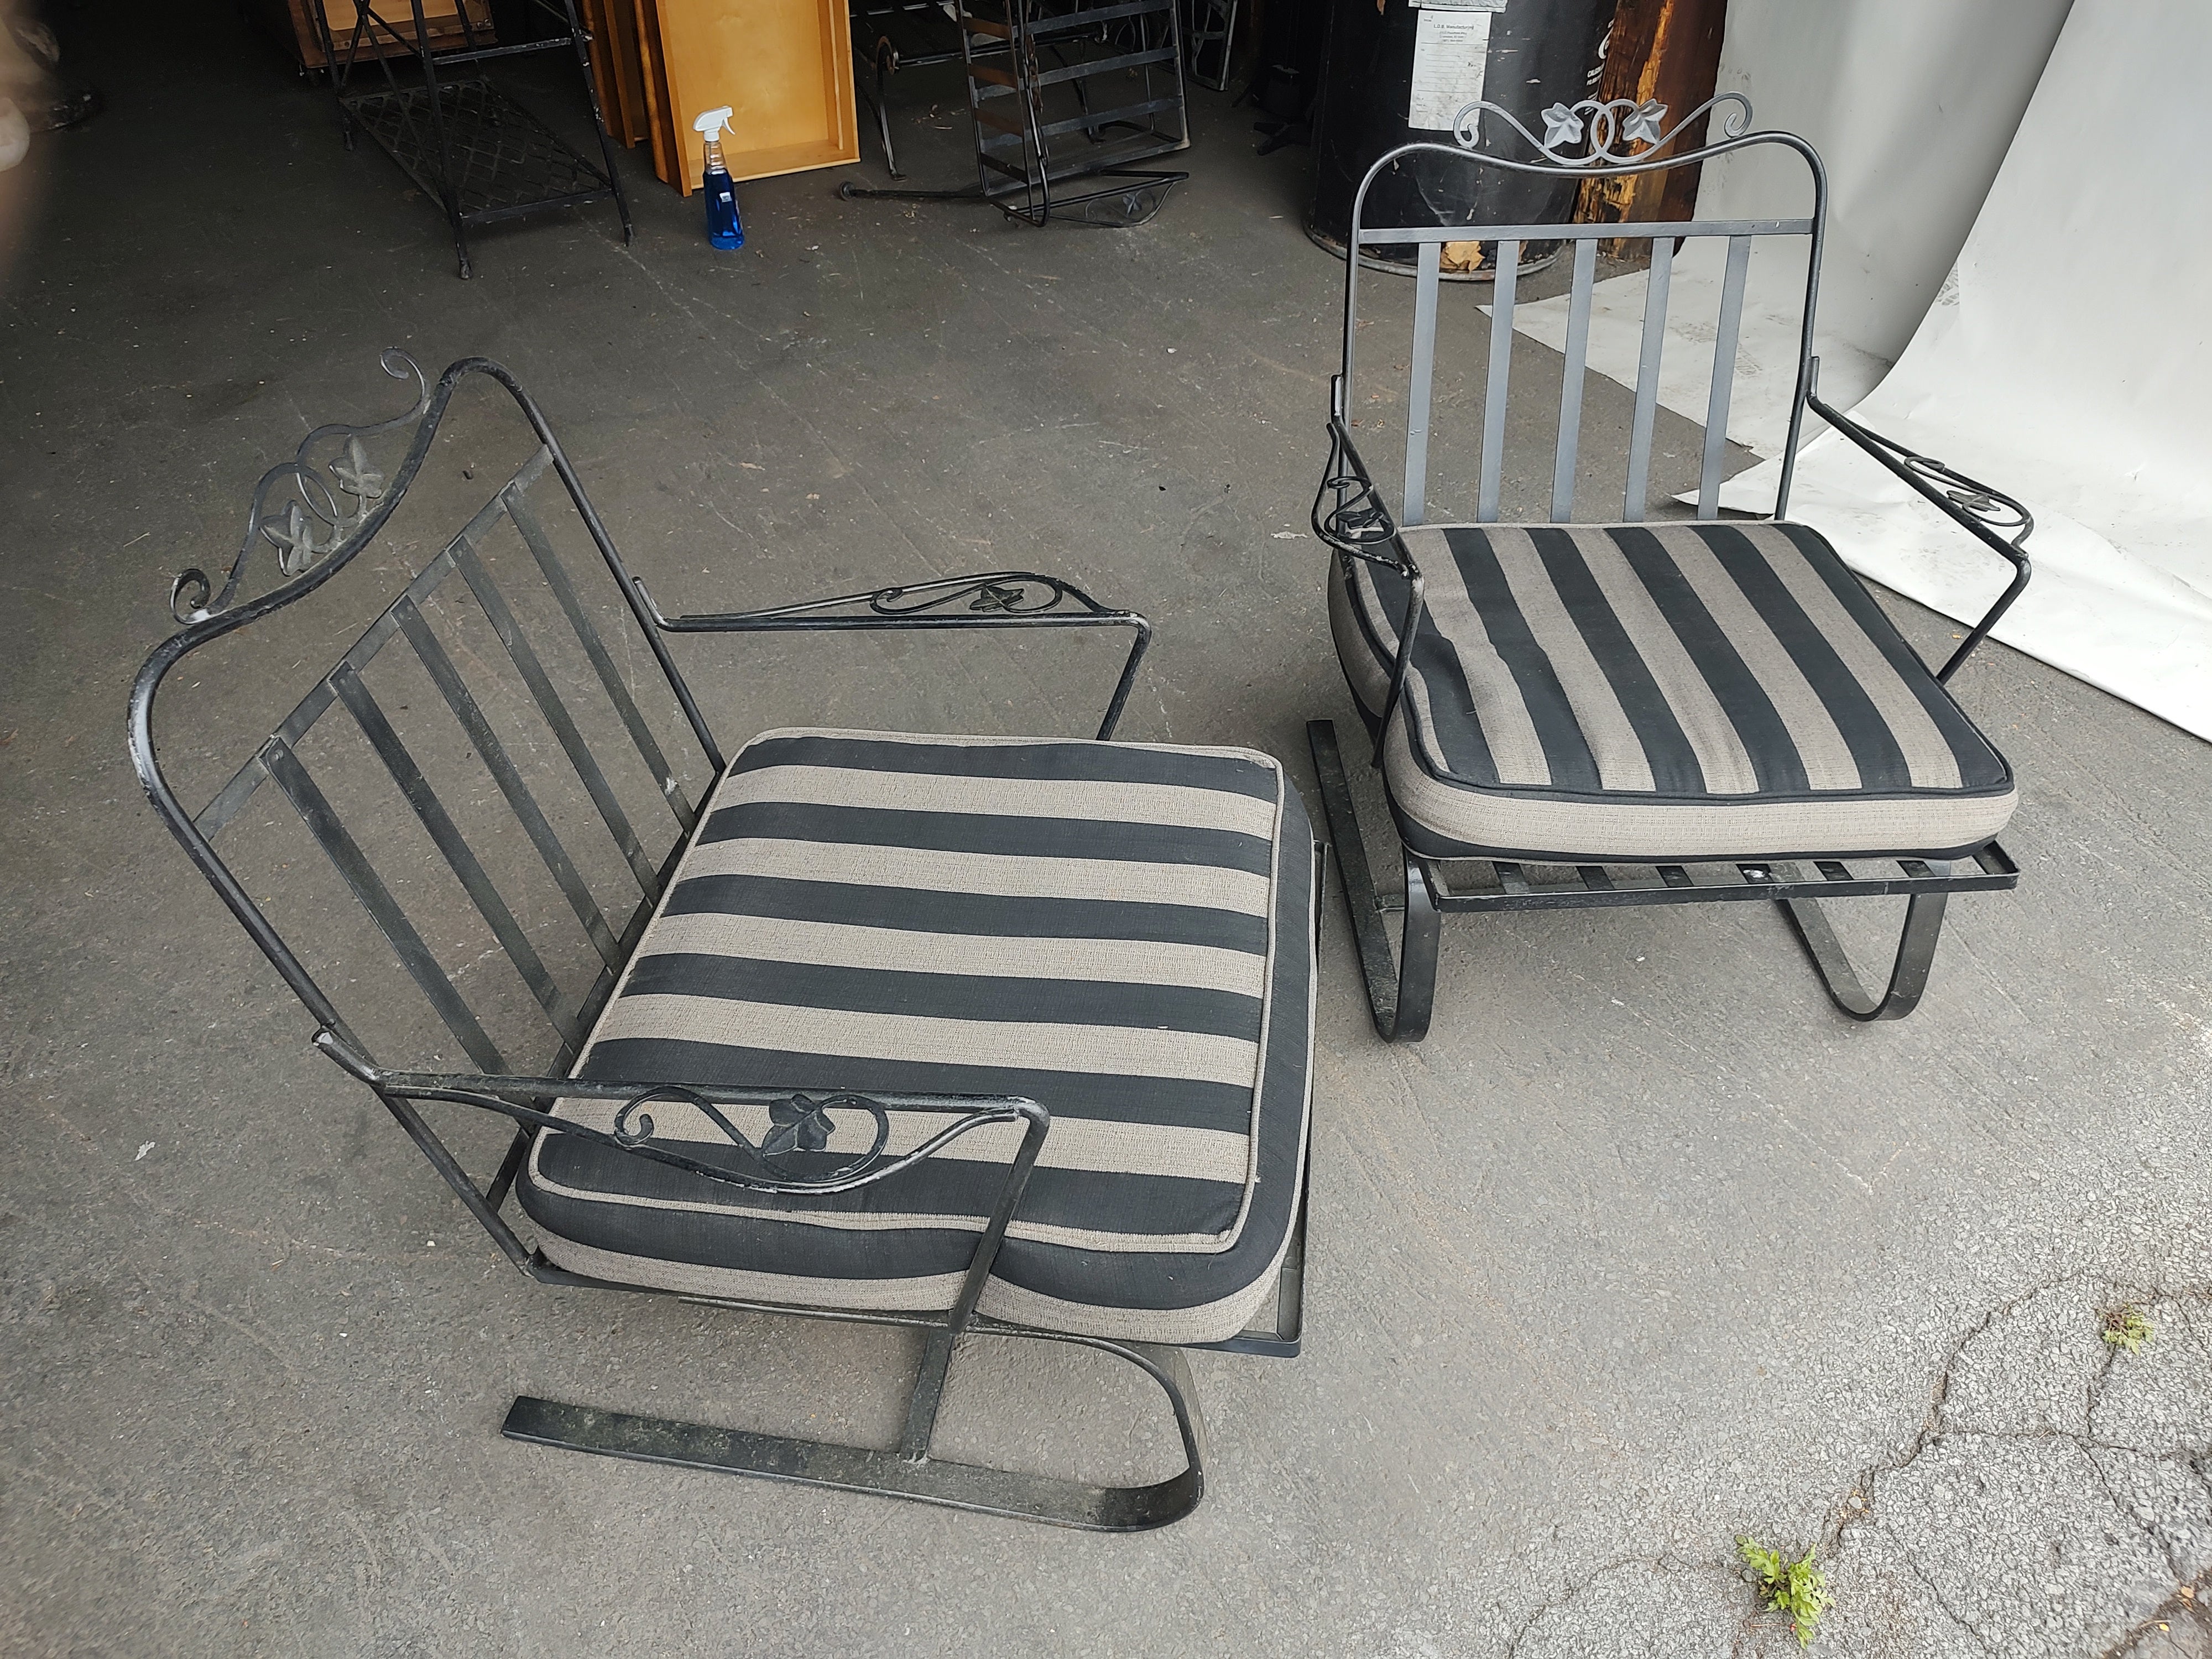 Fabulous pair of very comfy spring steel lounge armchairs by John Salterini. Full cushions in a striped silver & black outdoor fabric. Arched back for comfort with style. Iron & steel painted black and in very good vintage condition with minimal